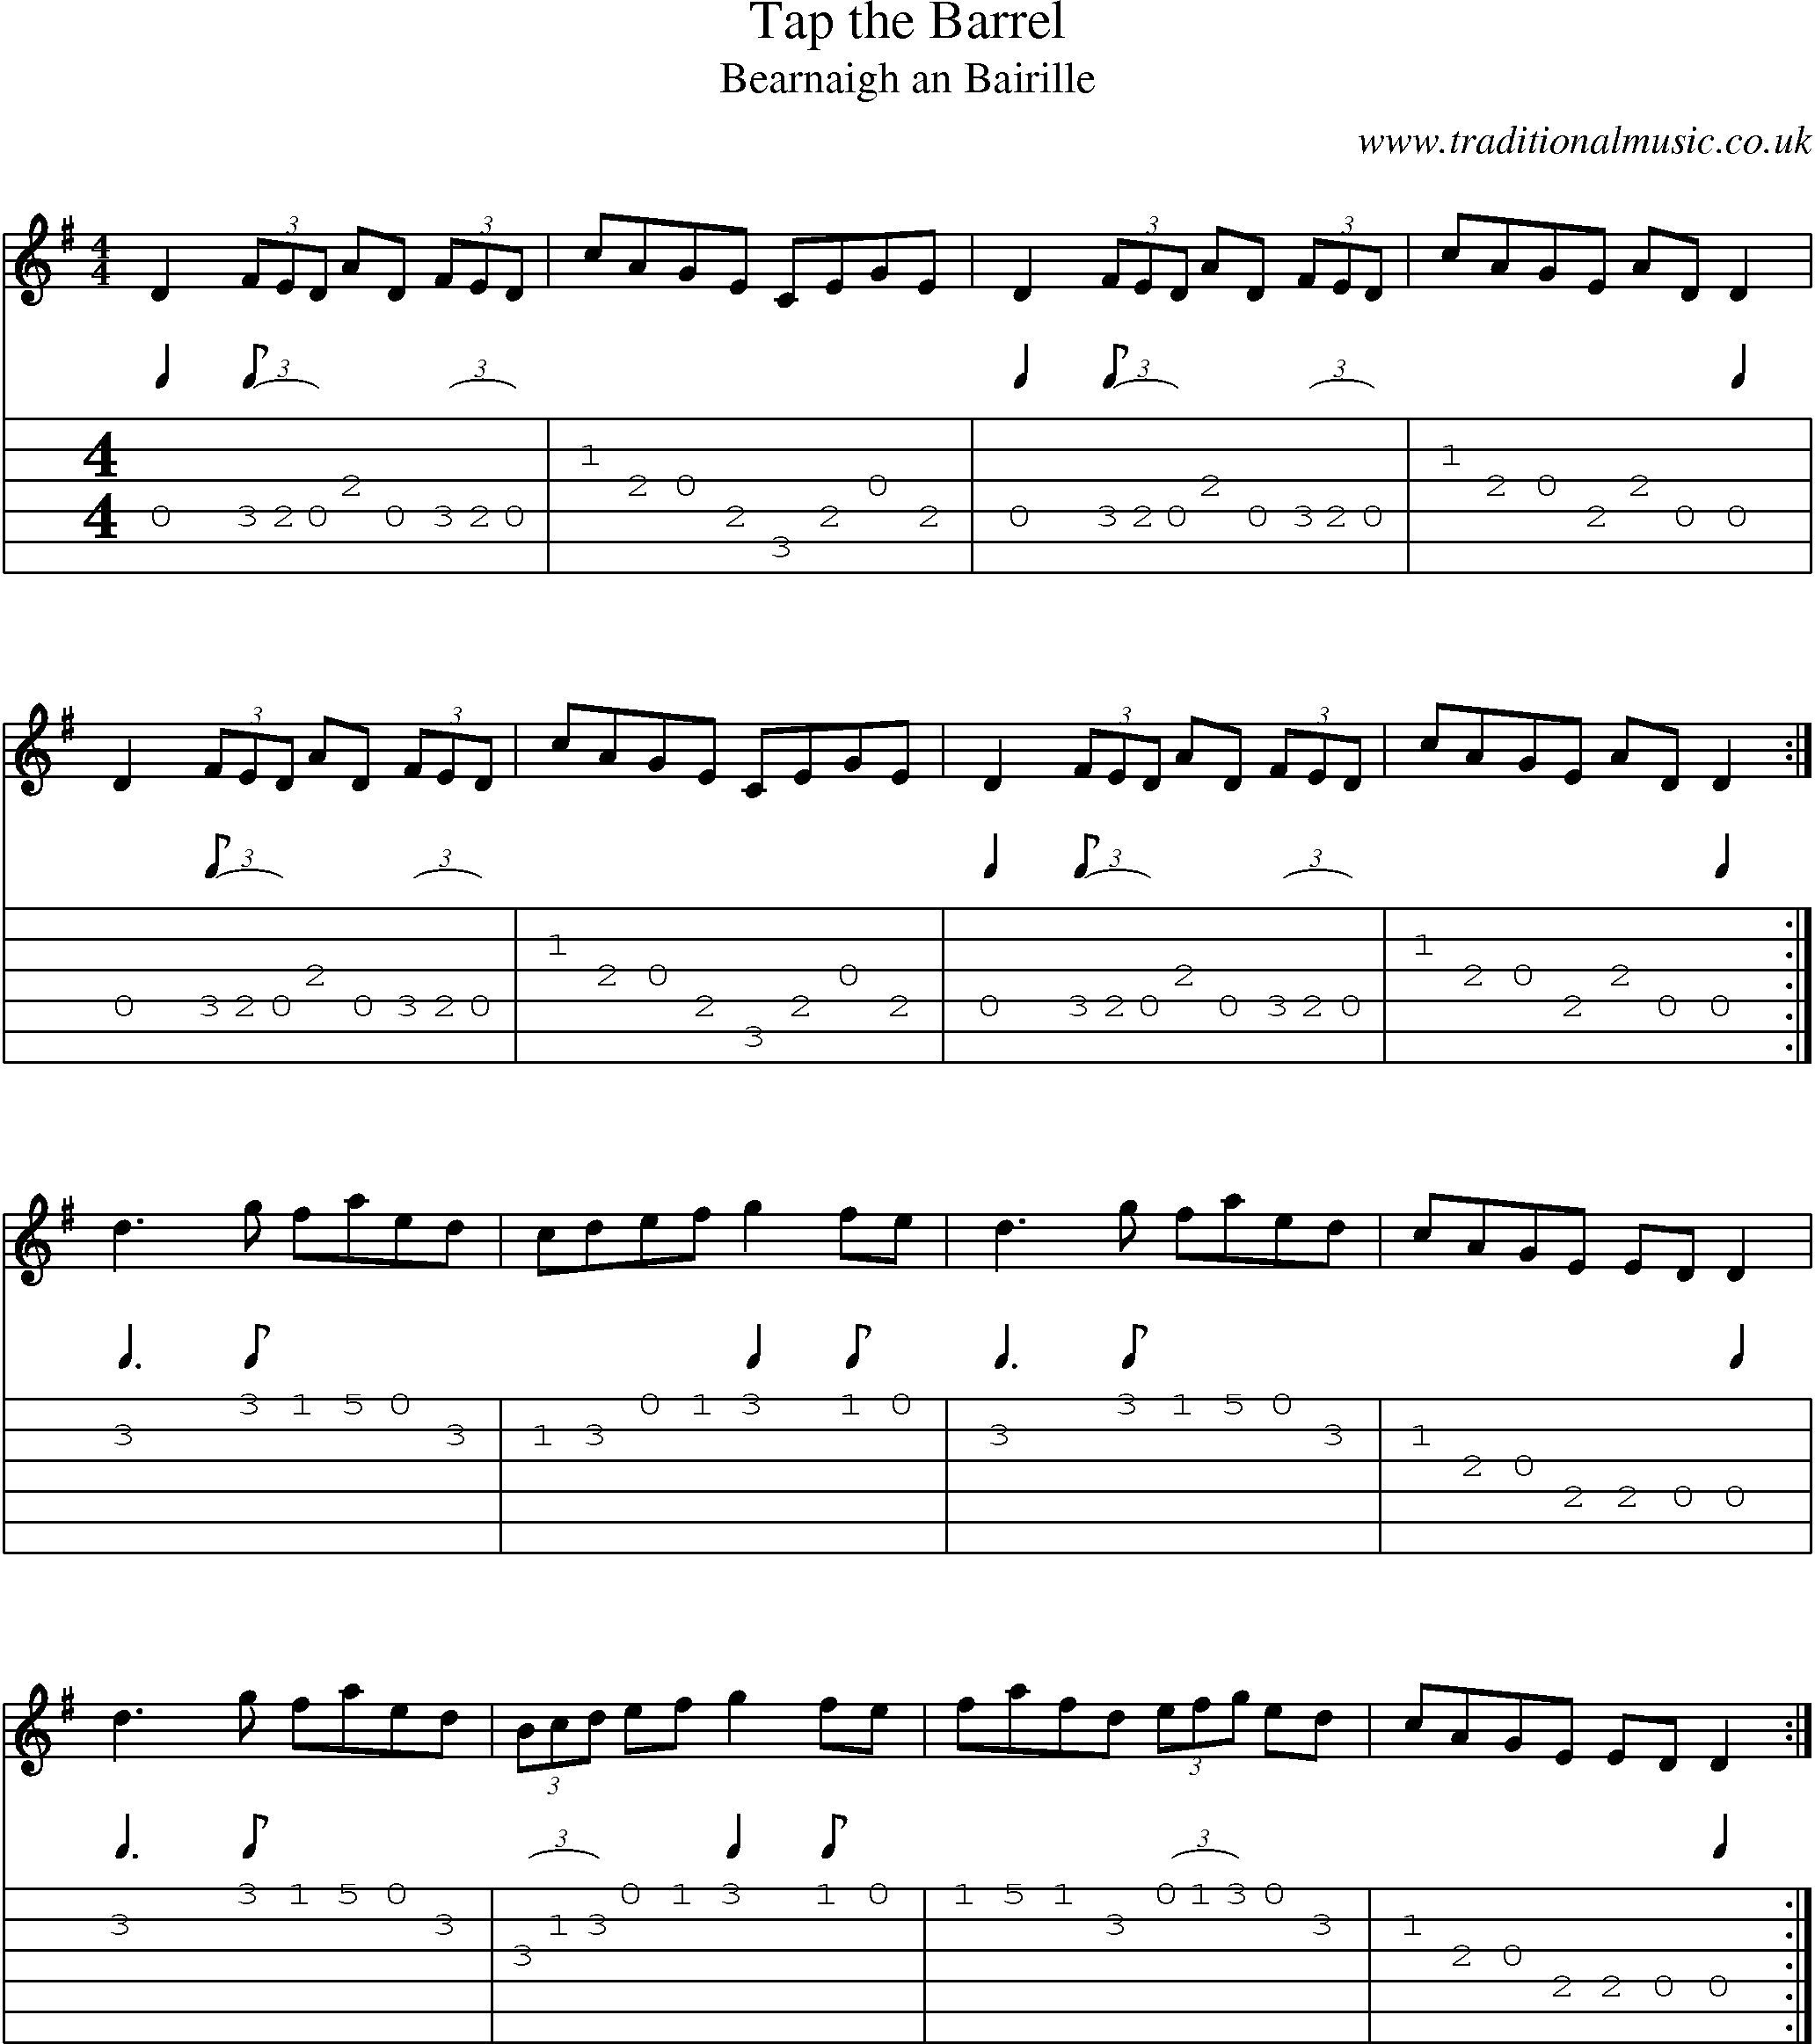 Music Score and Guitar Tabs for Tap Barrel